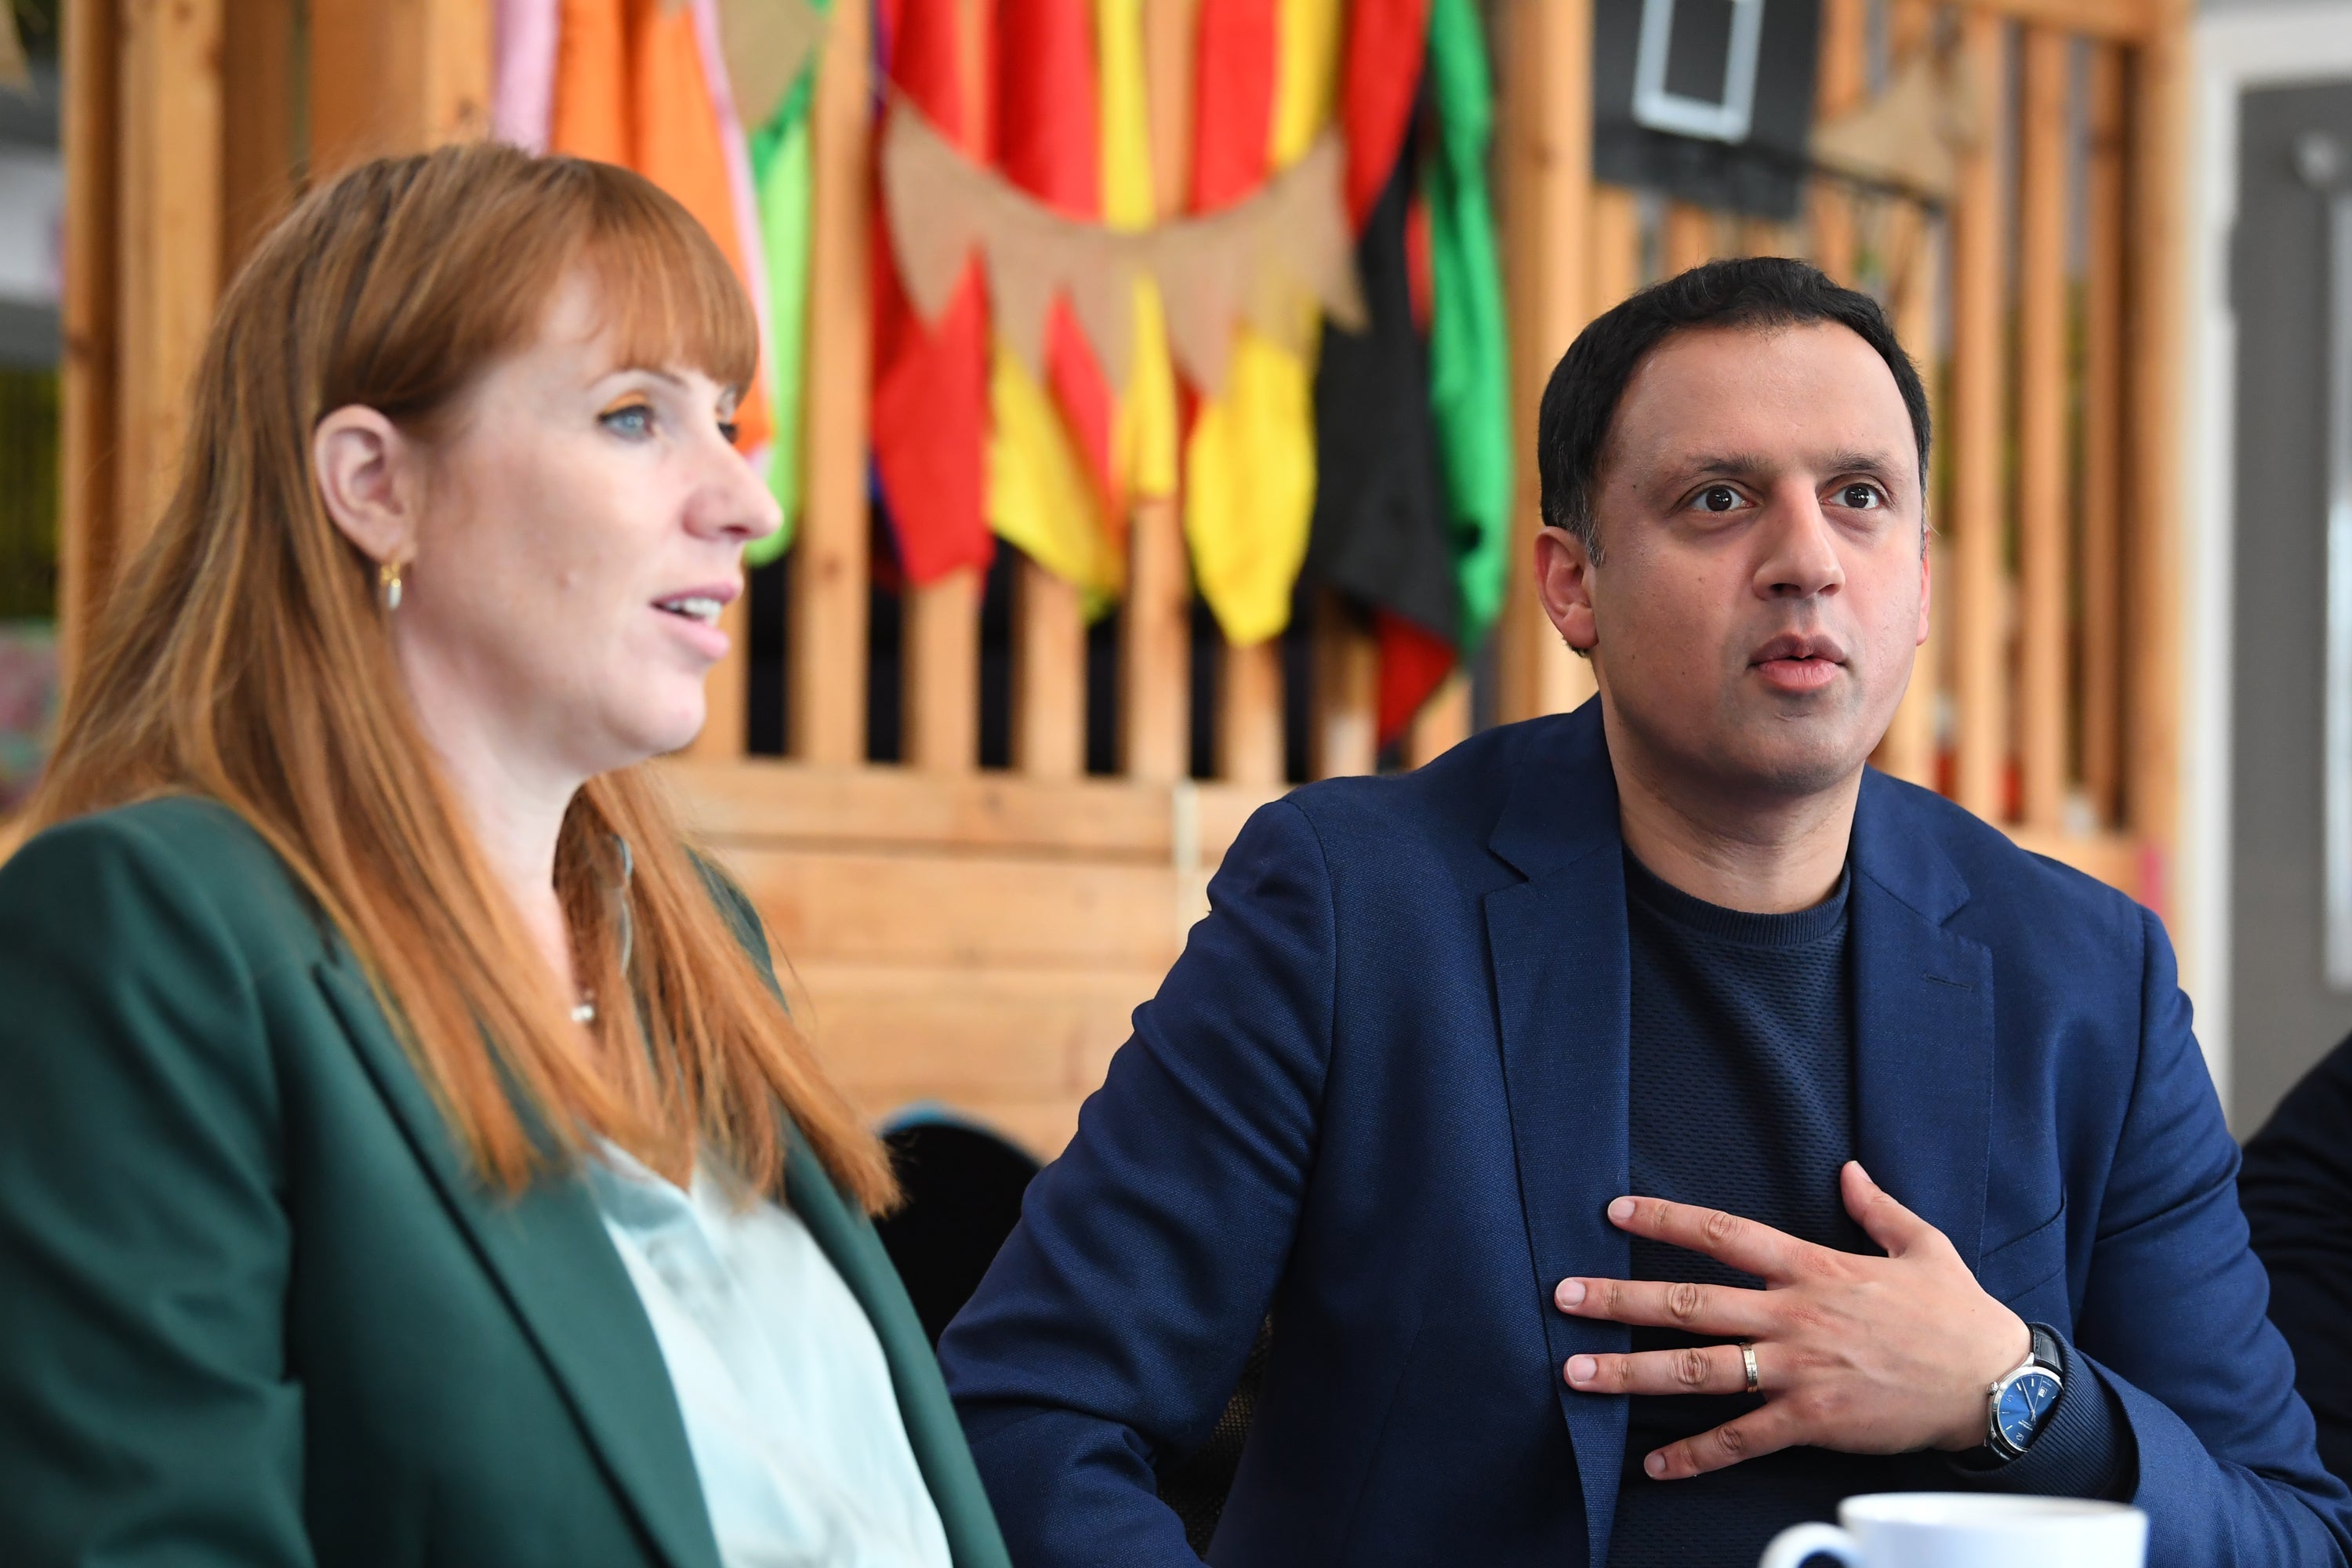 Deputy Labour leader Angela Rayner and Scottish Labour leader Anas Sarwar at the Broxburn Family and Community development centre in Livingston (Andy Buchanan/PA)